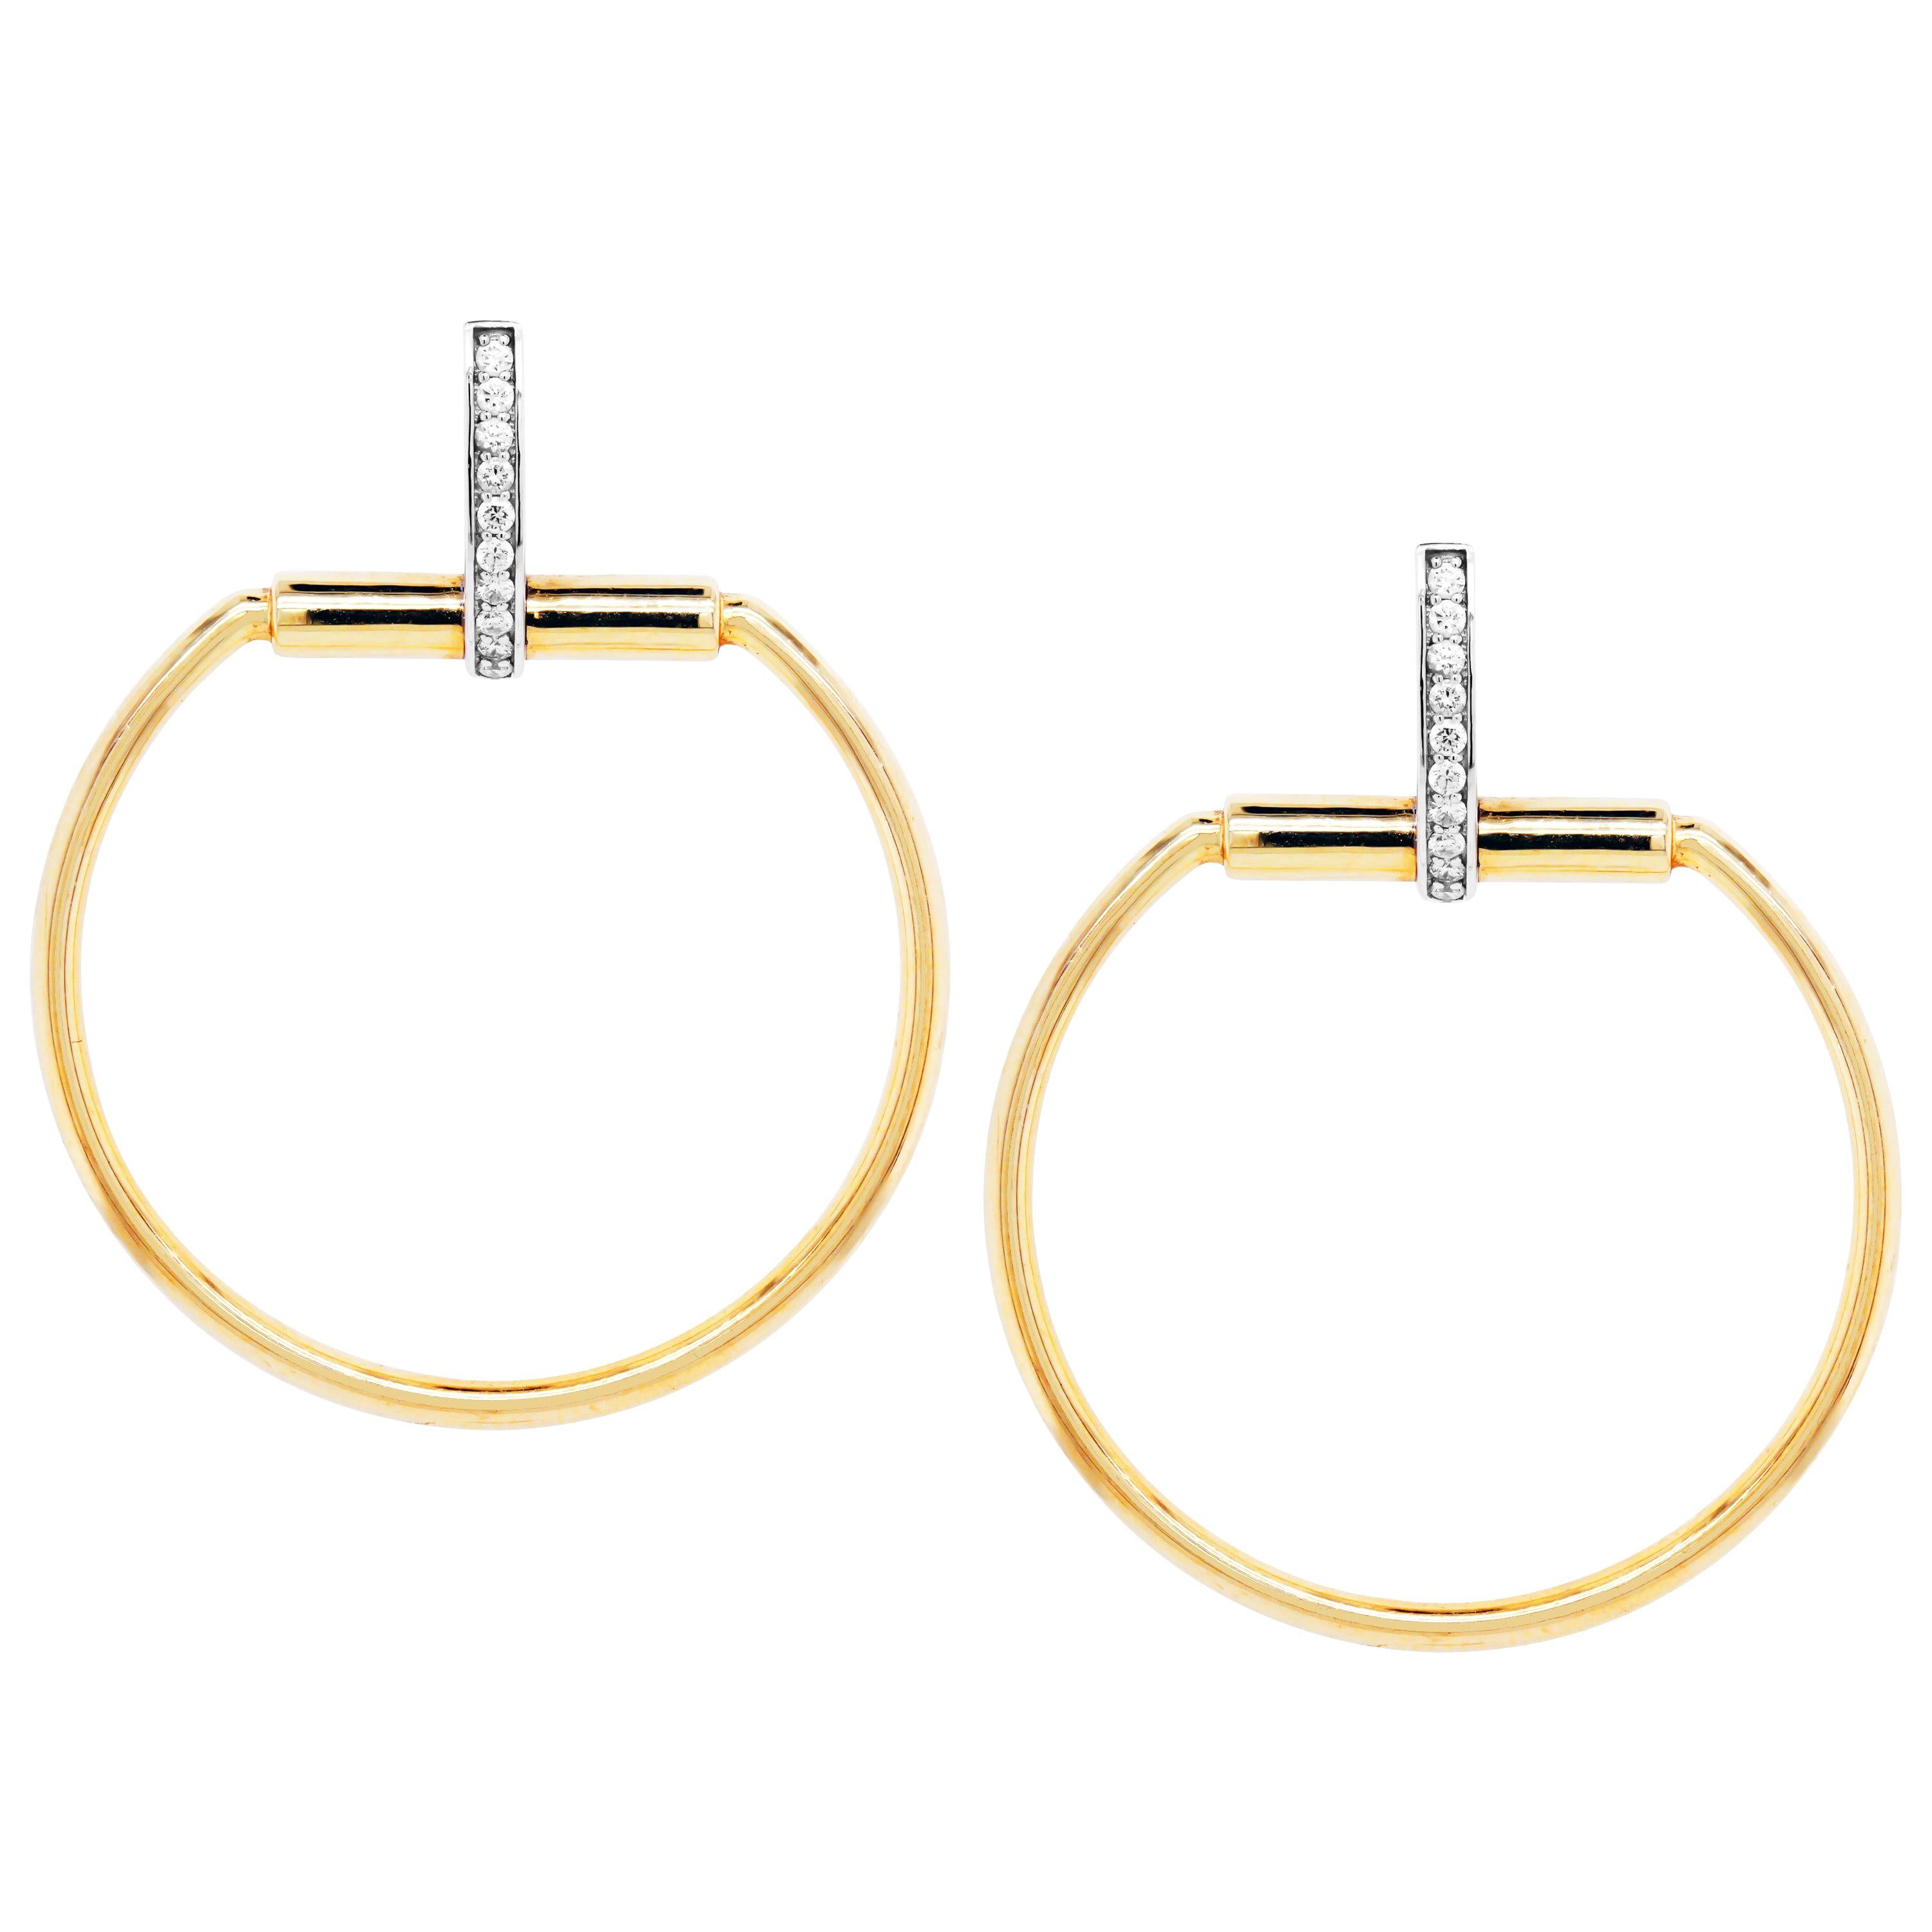 Roberto Coin Classica Parisienne Yellow Gold Small Diamond Circle Drop Earrings 